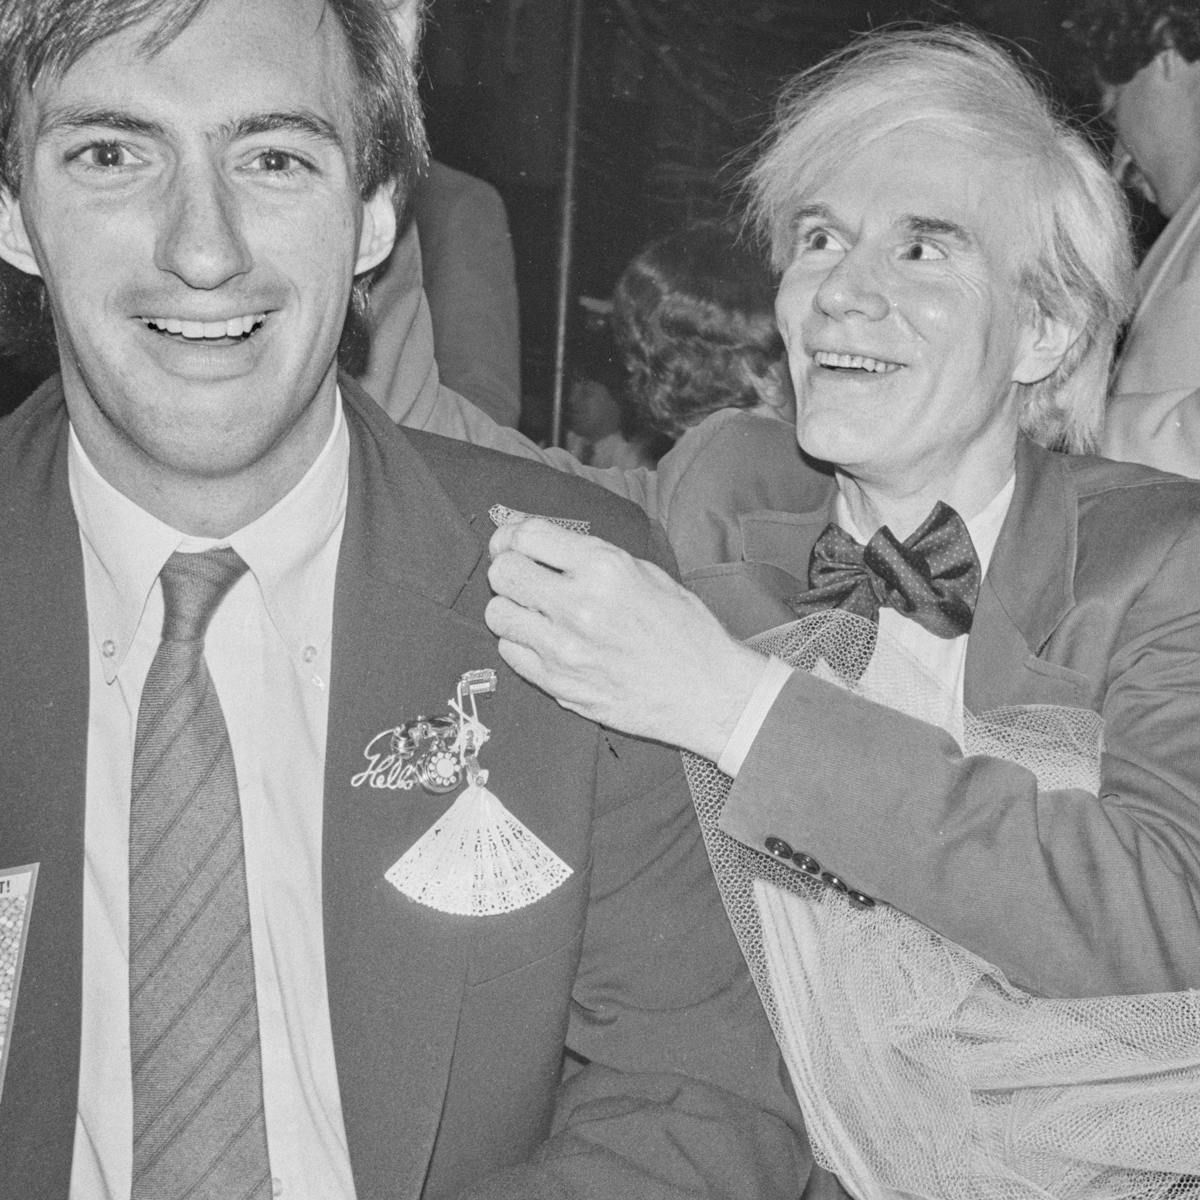 Jon Gould and Andy Warhol sit together. Jon wears a dark blazer with many eccentric pins. Warhol grins and looks at something off camera. He wears a bowtie and a sits in a pool of tulle.